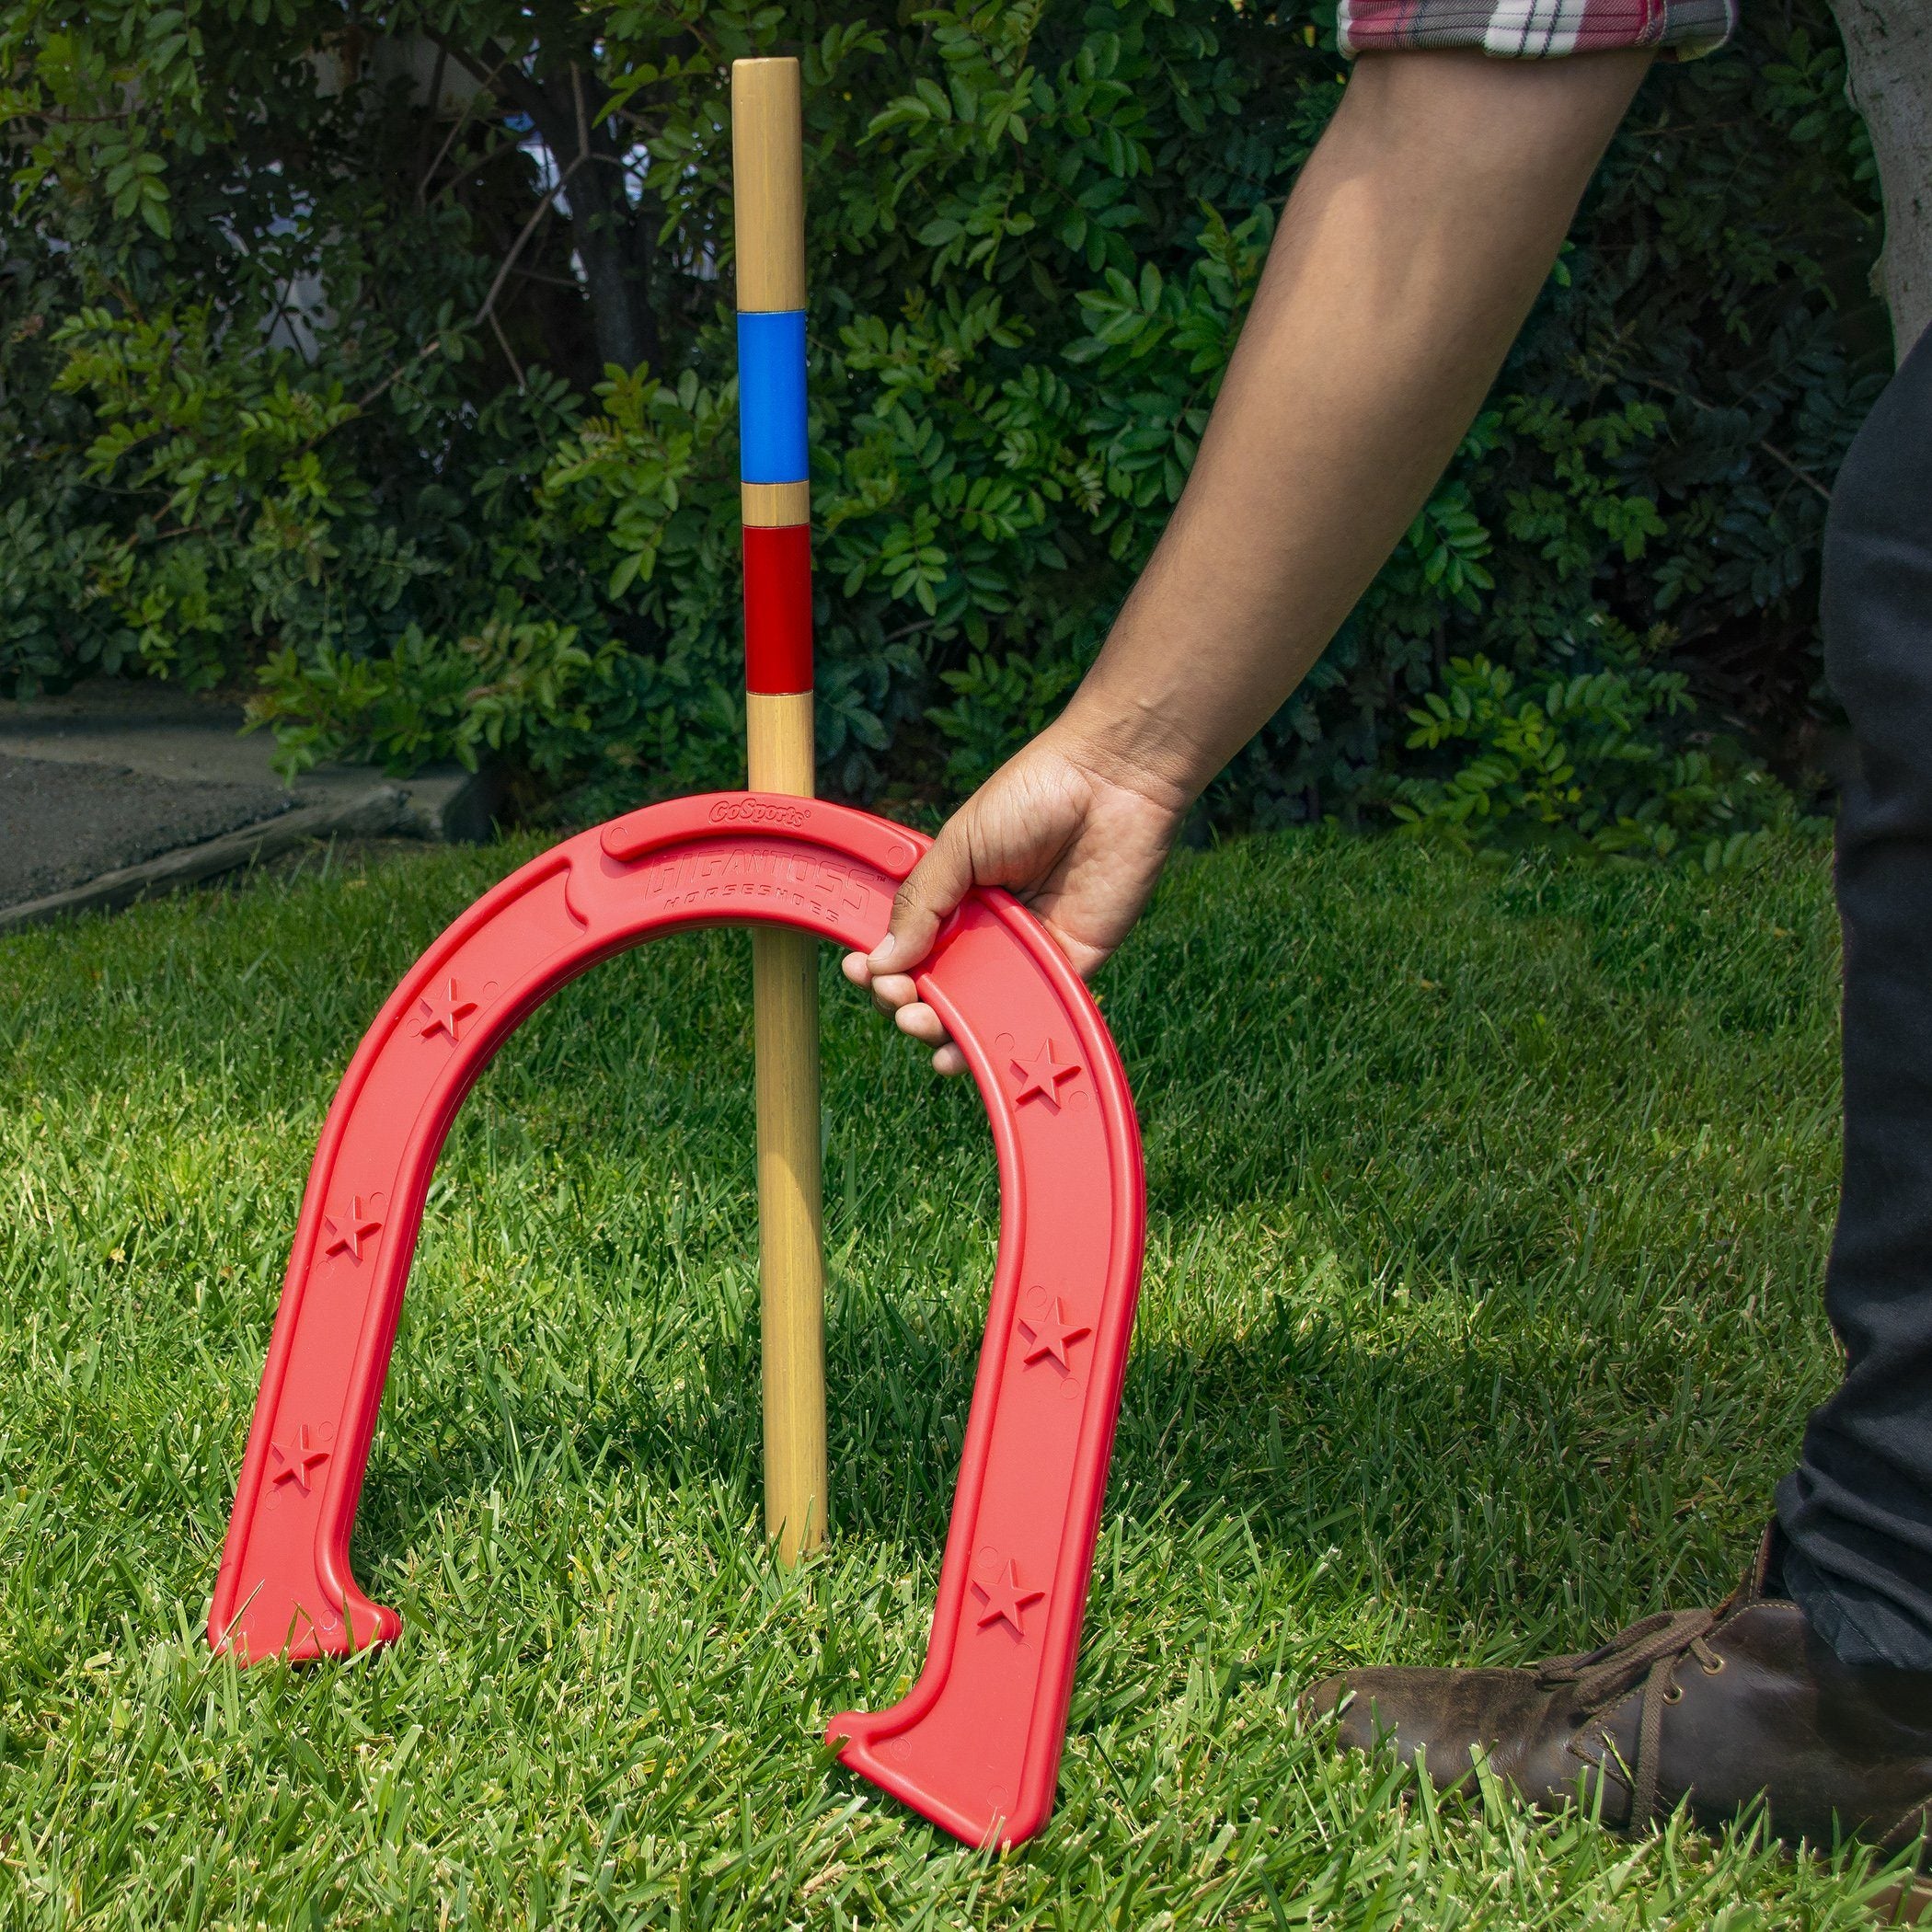  Horseshoes Clydesdale Yard Game with Stakes : Sports